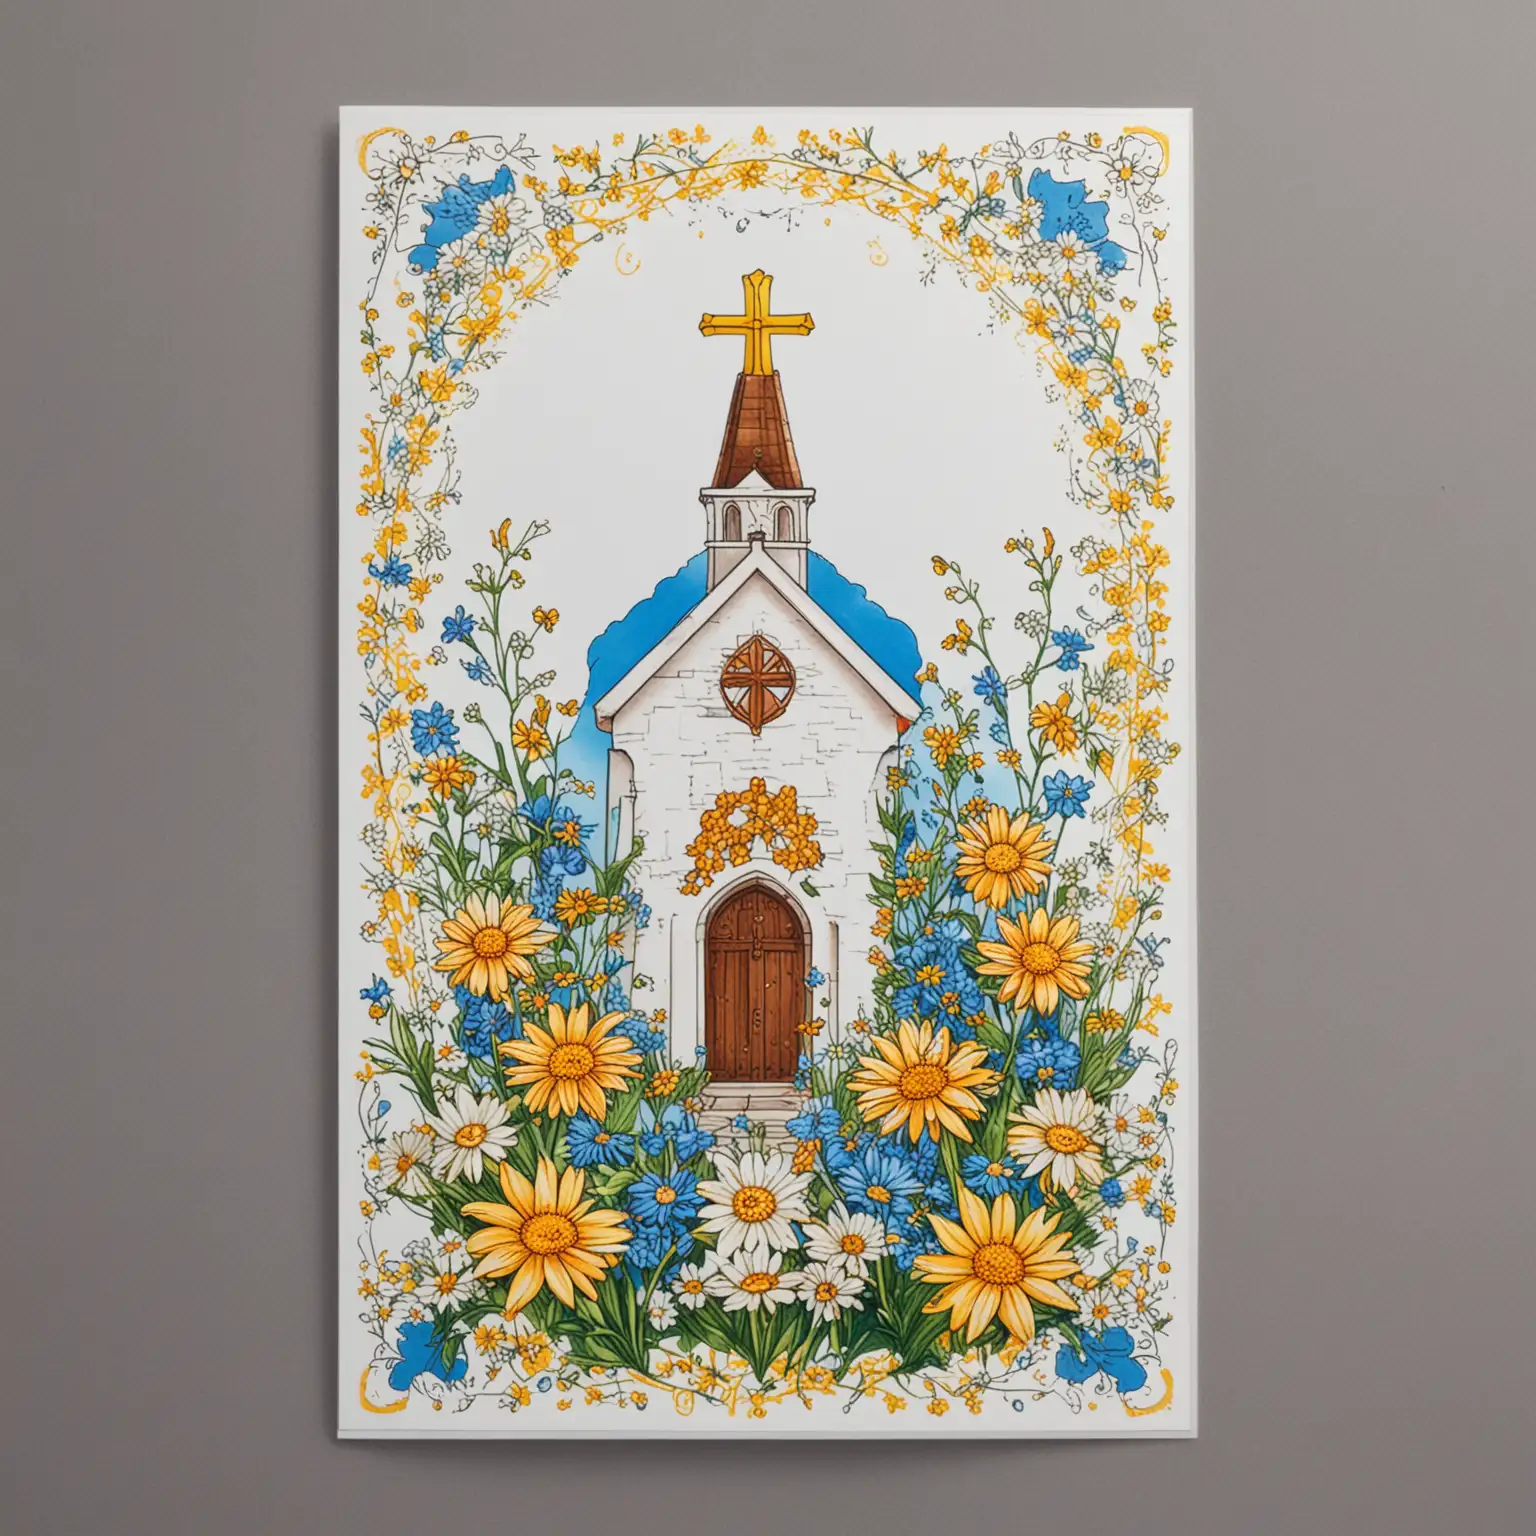 Easter Card vertical shape with a church outline - card to have bright coloured Easter Flowers. Flowers to be blue, yellow, white - all flowers to be small size including a small white daisies. Card to have a thin ornate cross at the left hand side